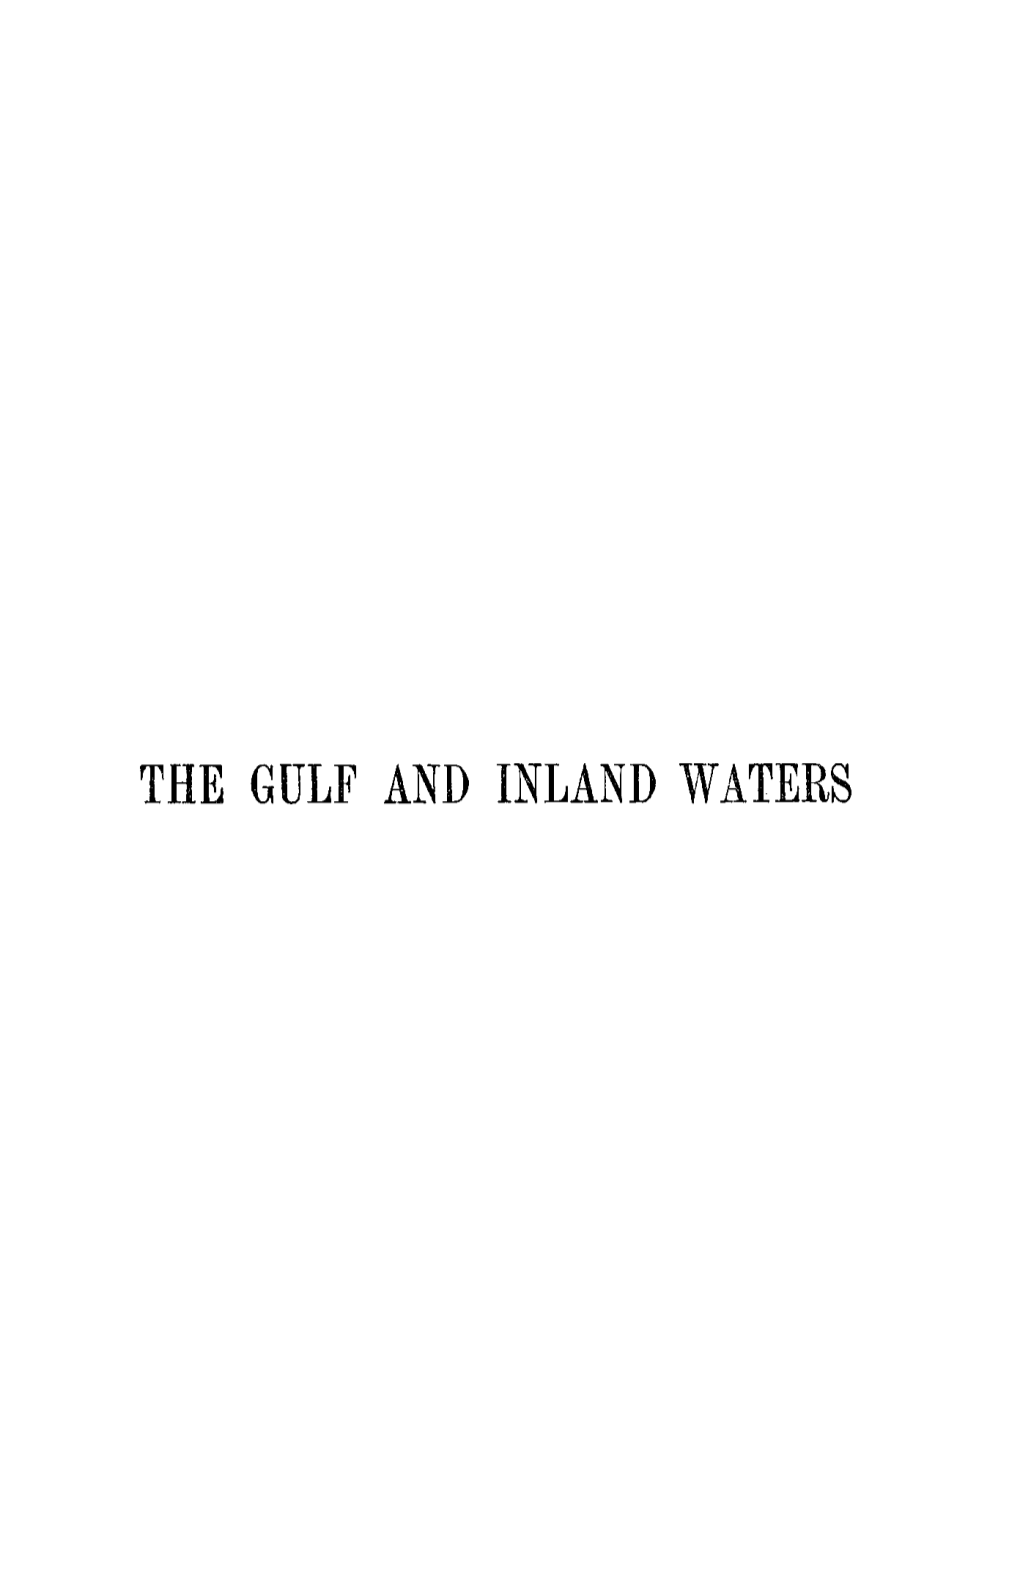 The Gulf and Injland Wabters